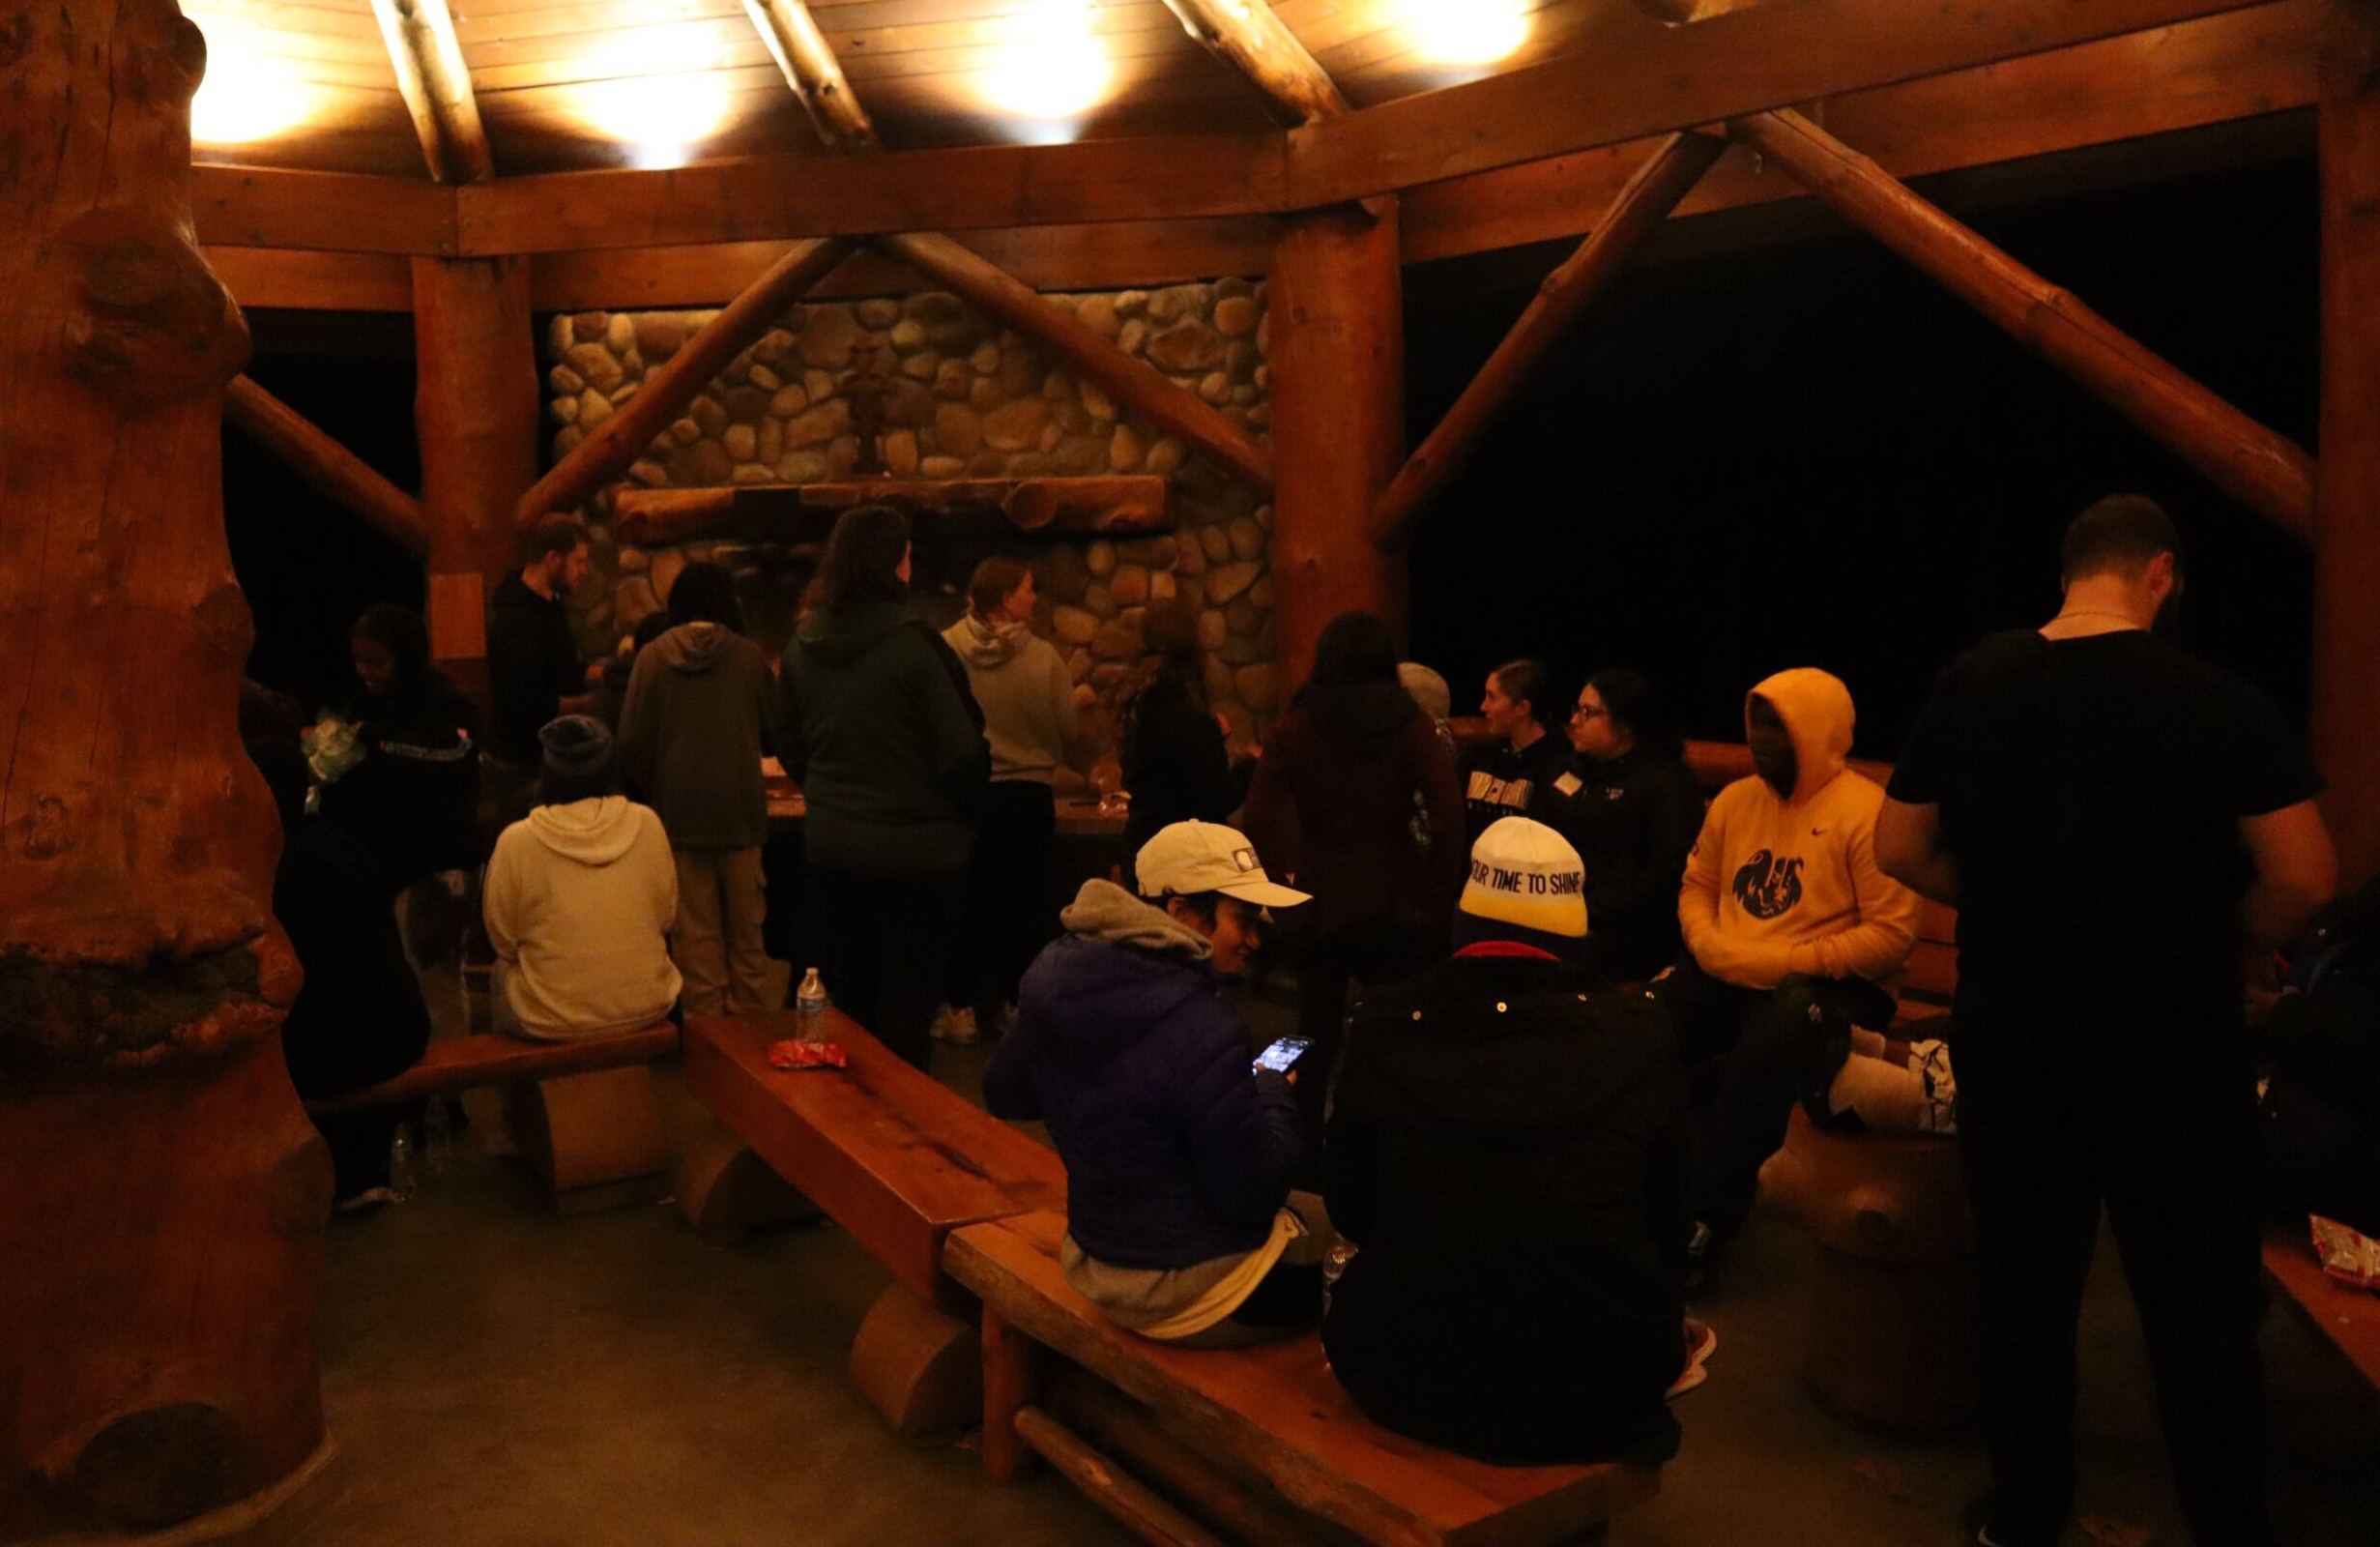 Group of students in a dimly lit cabin sitting on wooden benches